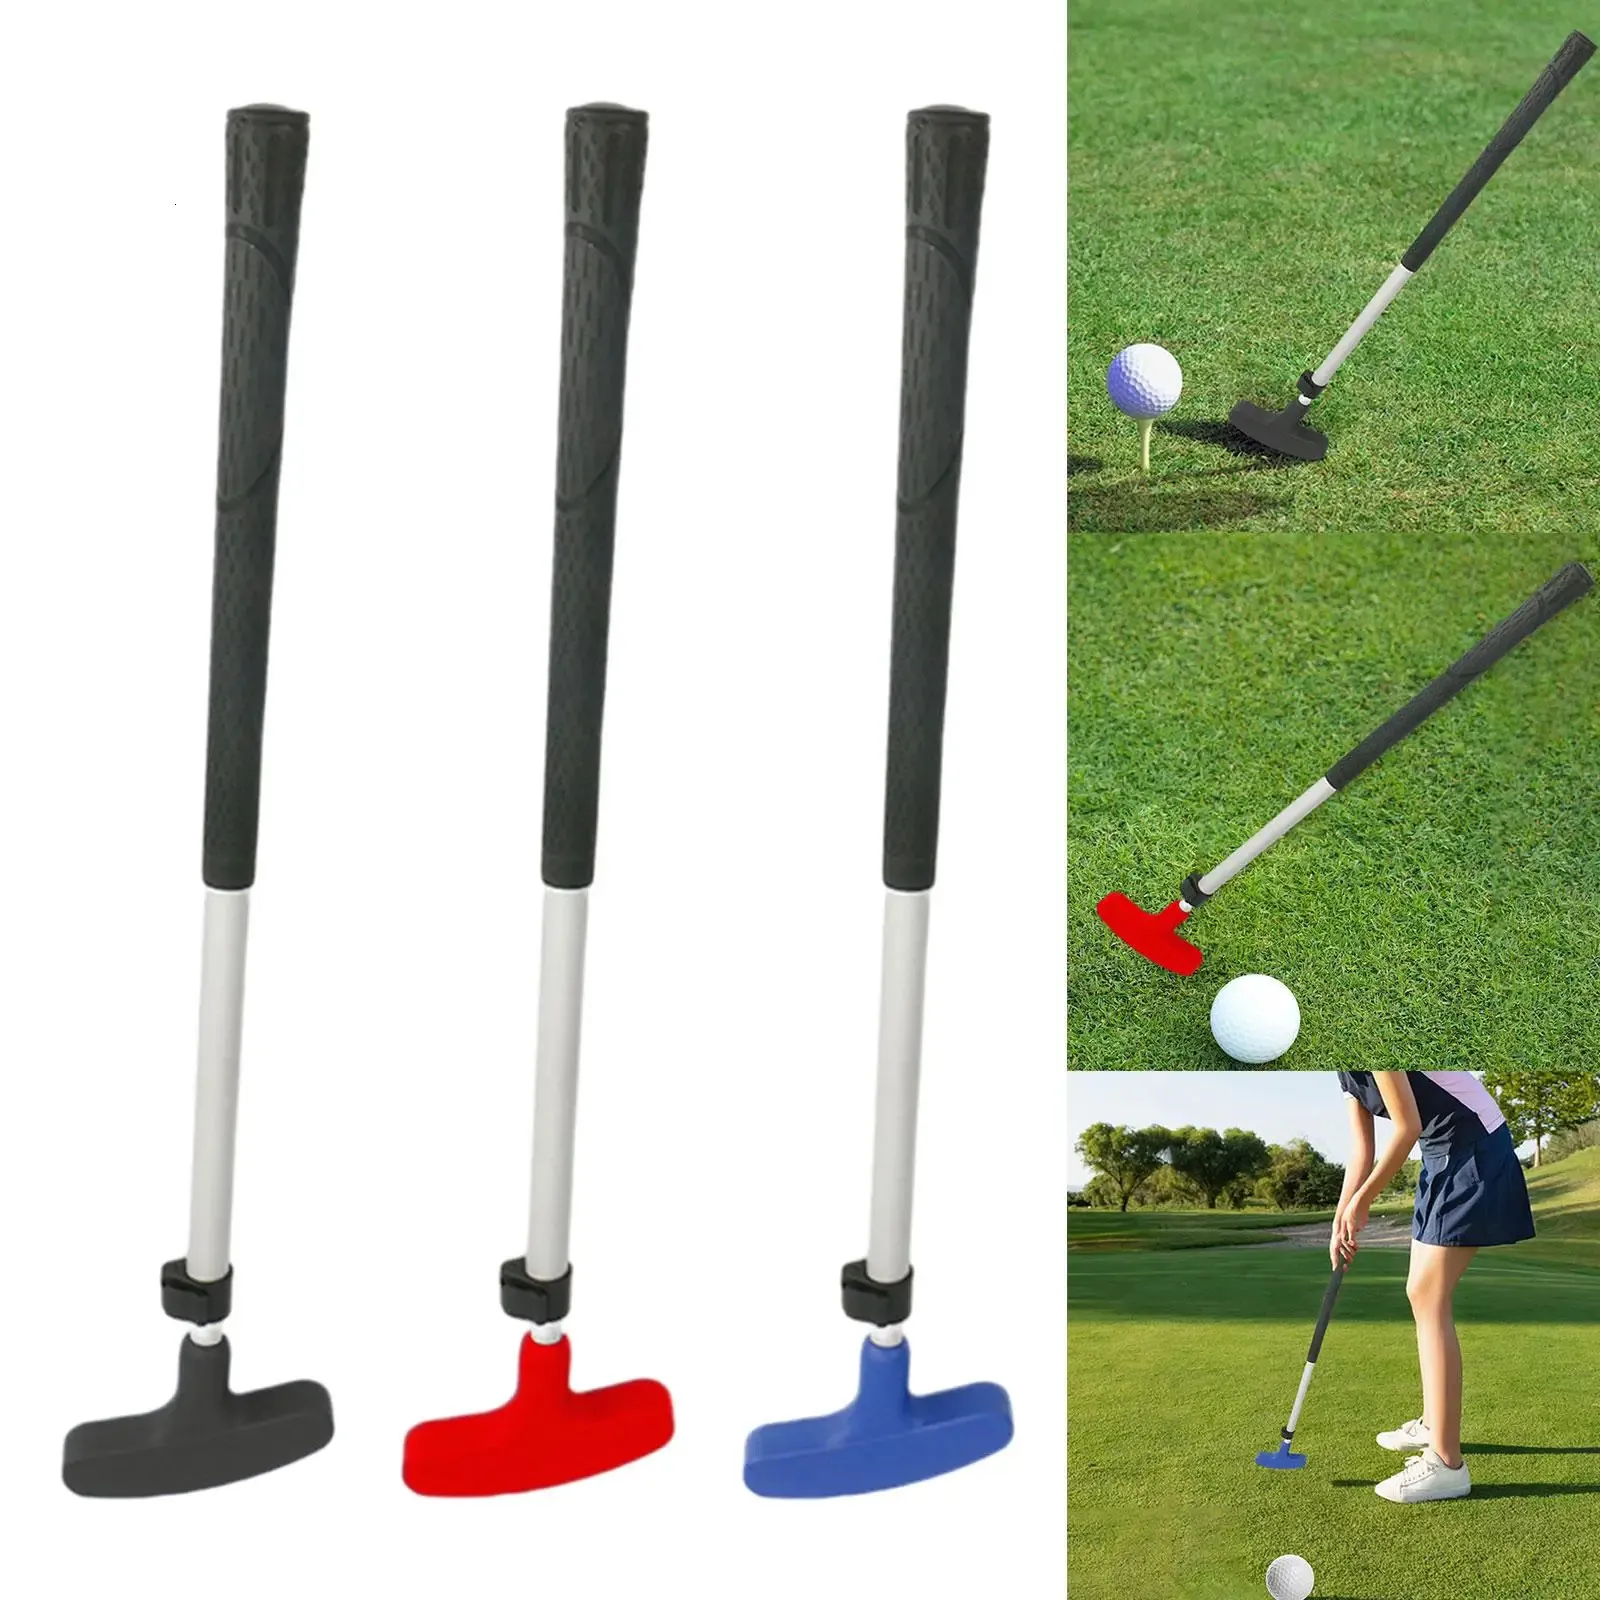 Golf Putter Golf Putting Practice Tool Golf Equipment Training Nonslip Right Left Handed, Two Way Golf Putter Golf Club 